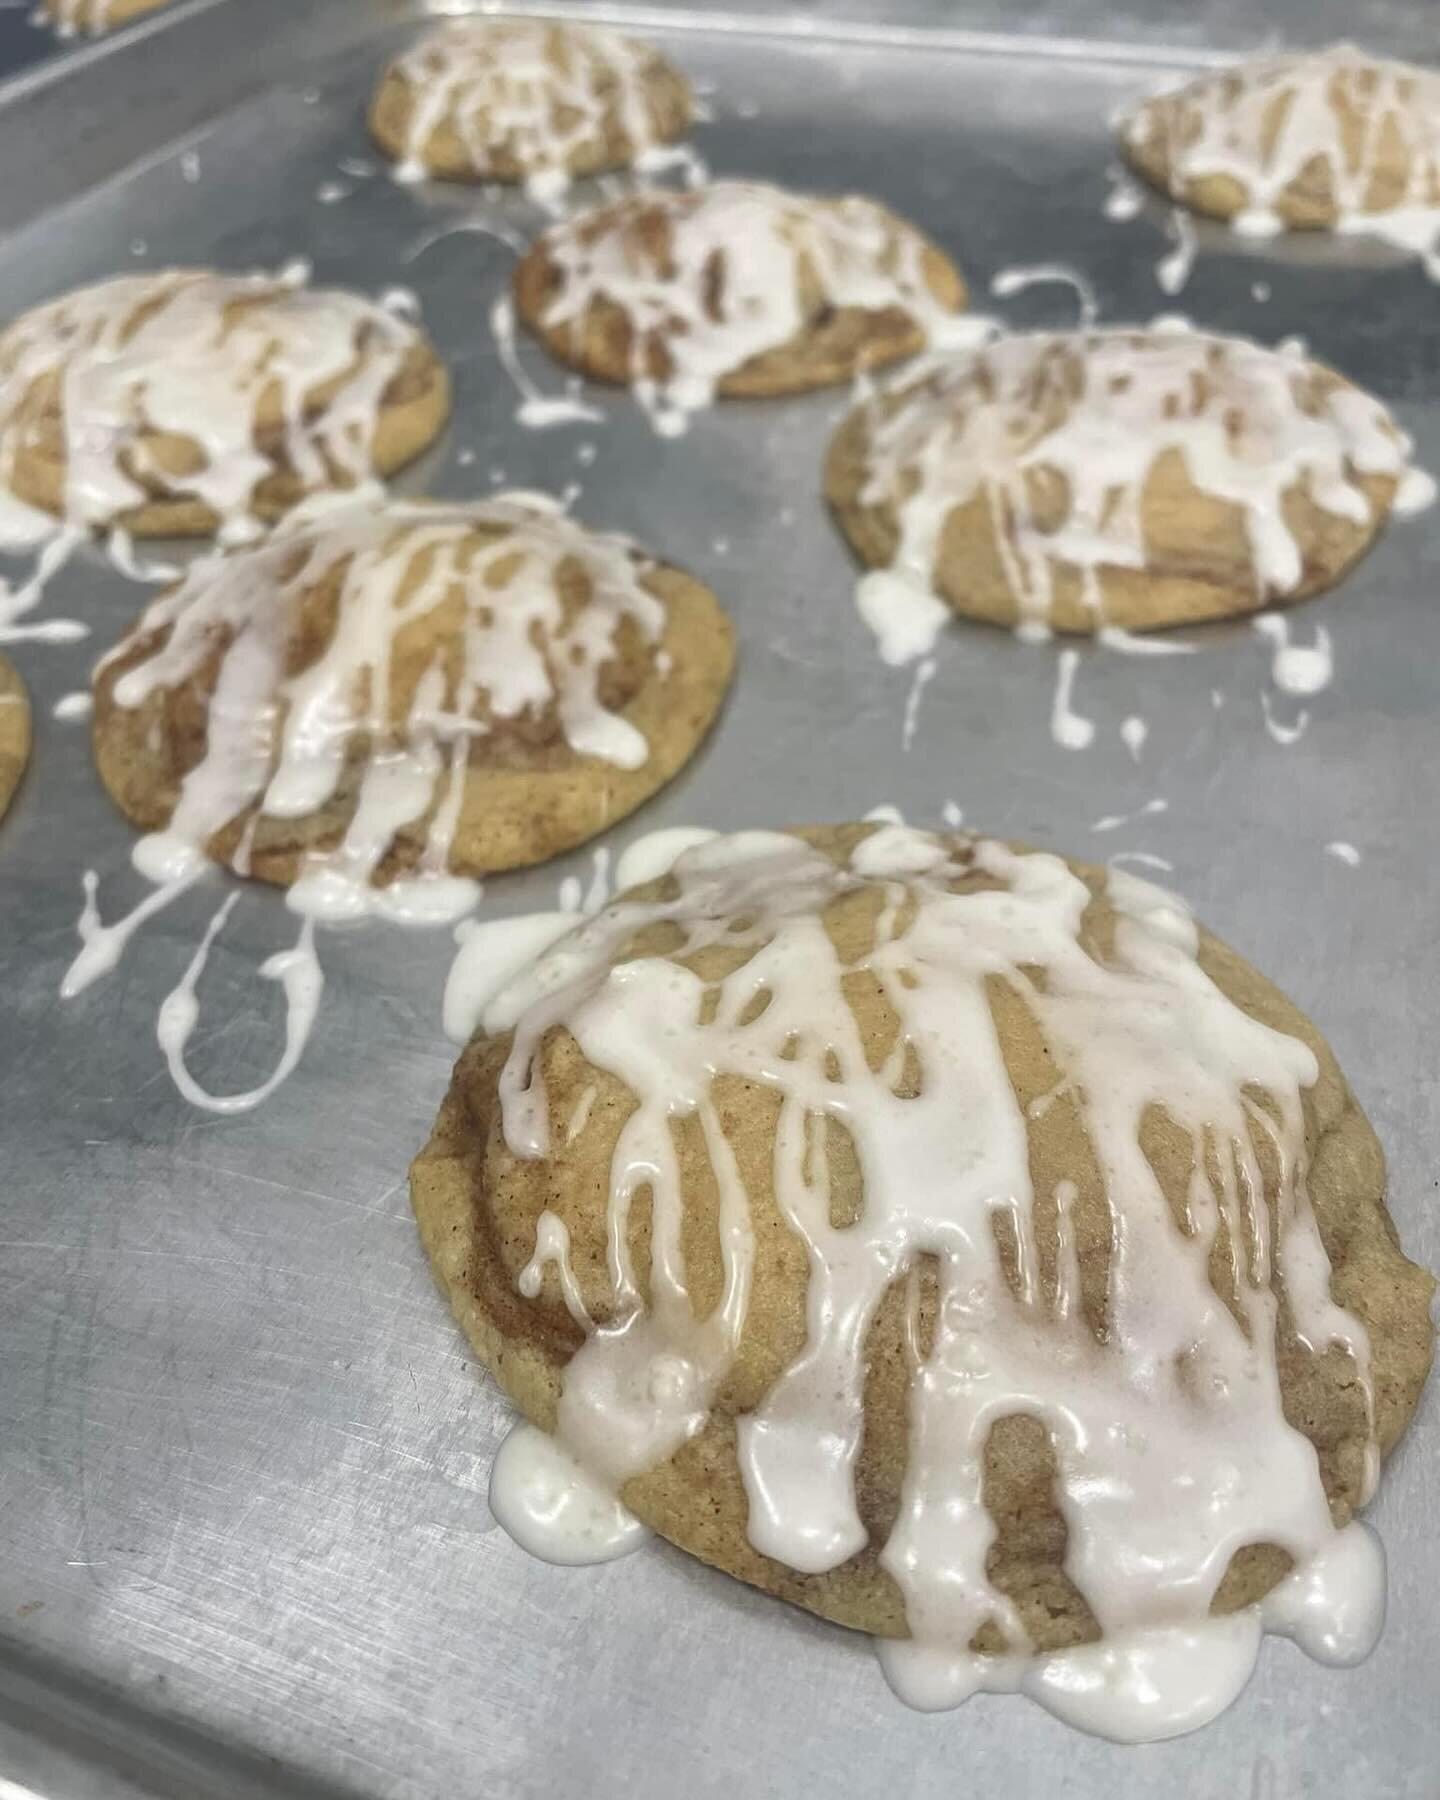 Fresh batch of Cinnamon Roll cookies just dropped😎Open til 8, see you soon!